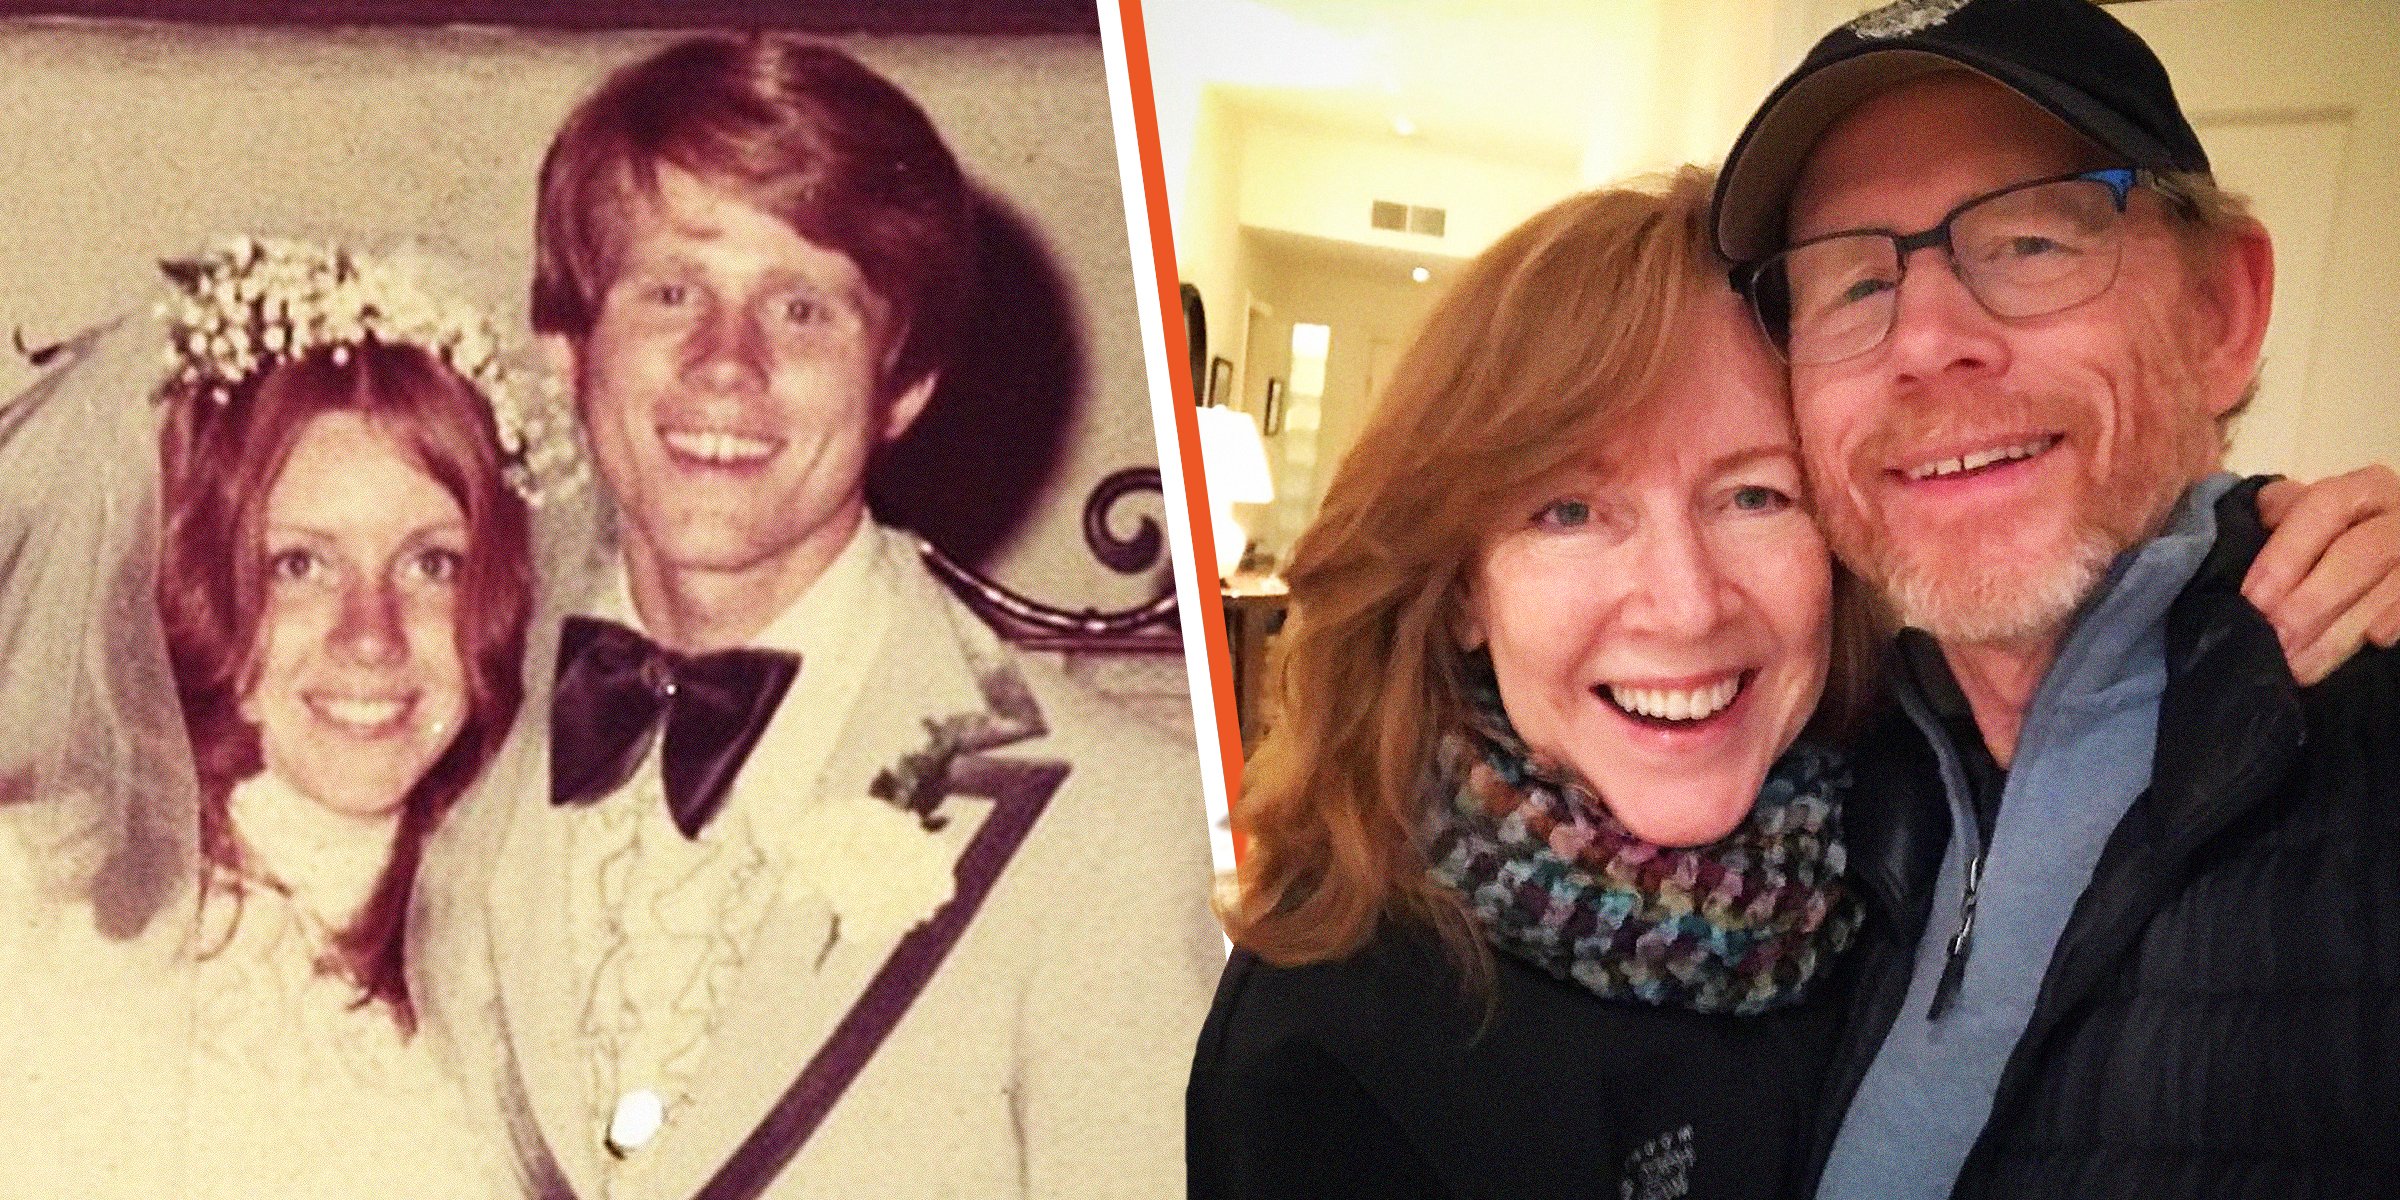 Ron Howard and Cheryl Howard. | Source: Instagram.com/realronhoward | Getty Images